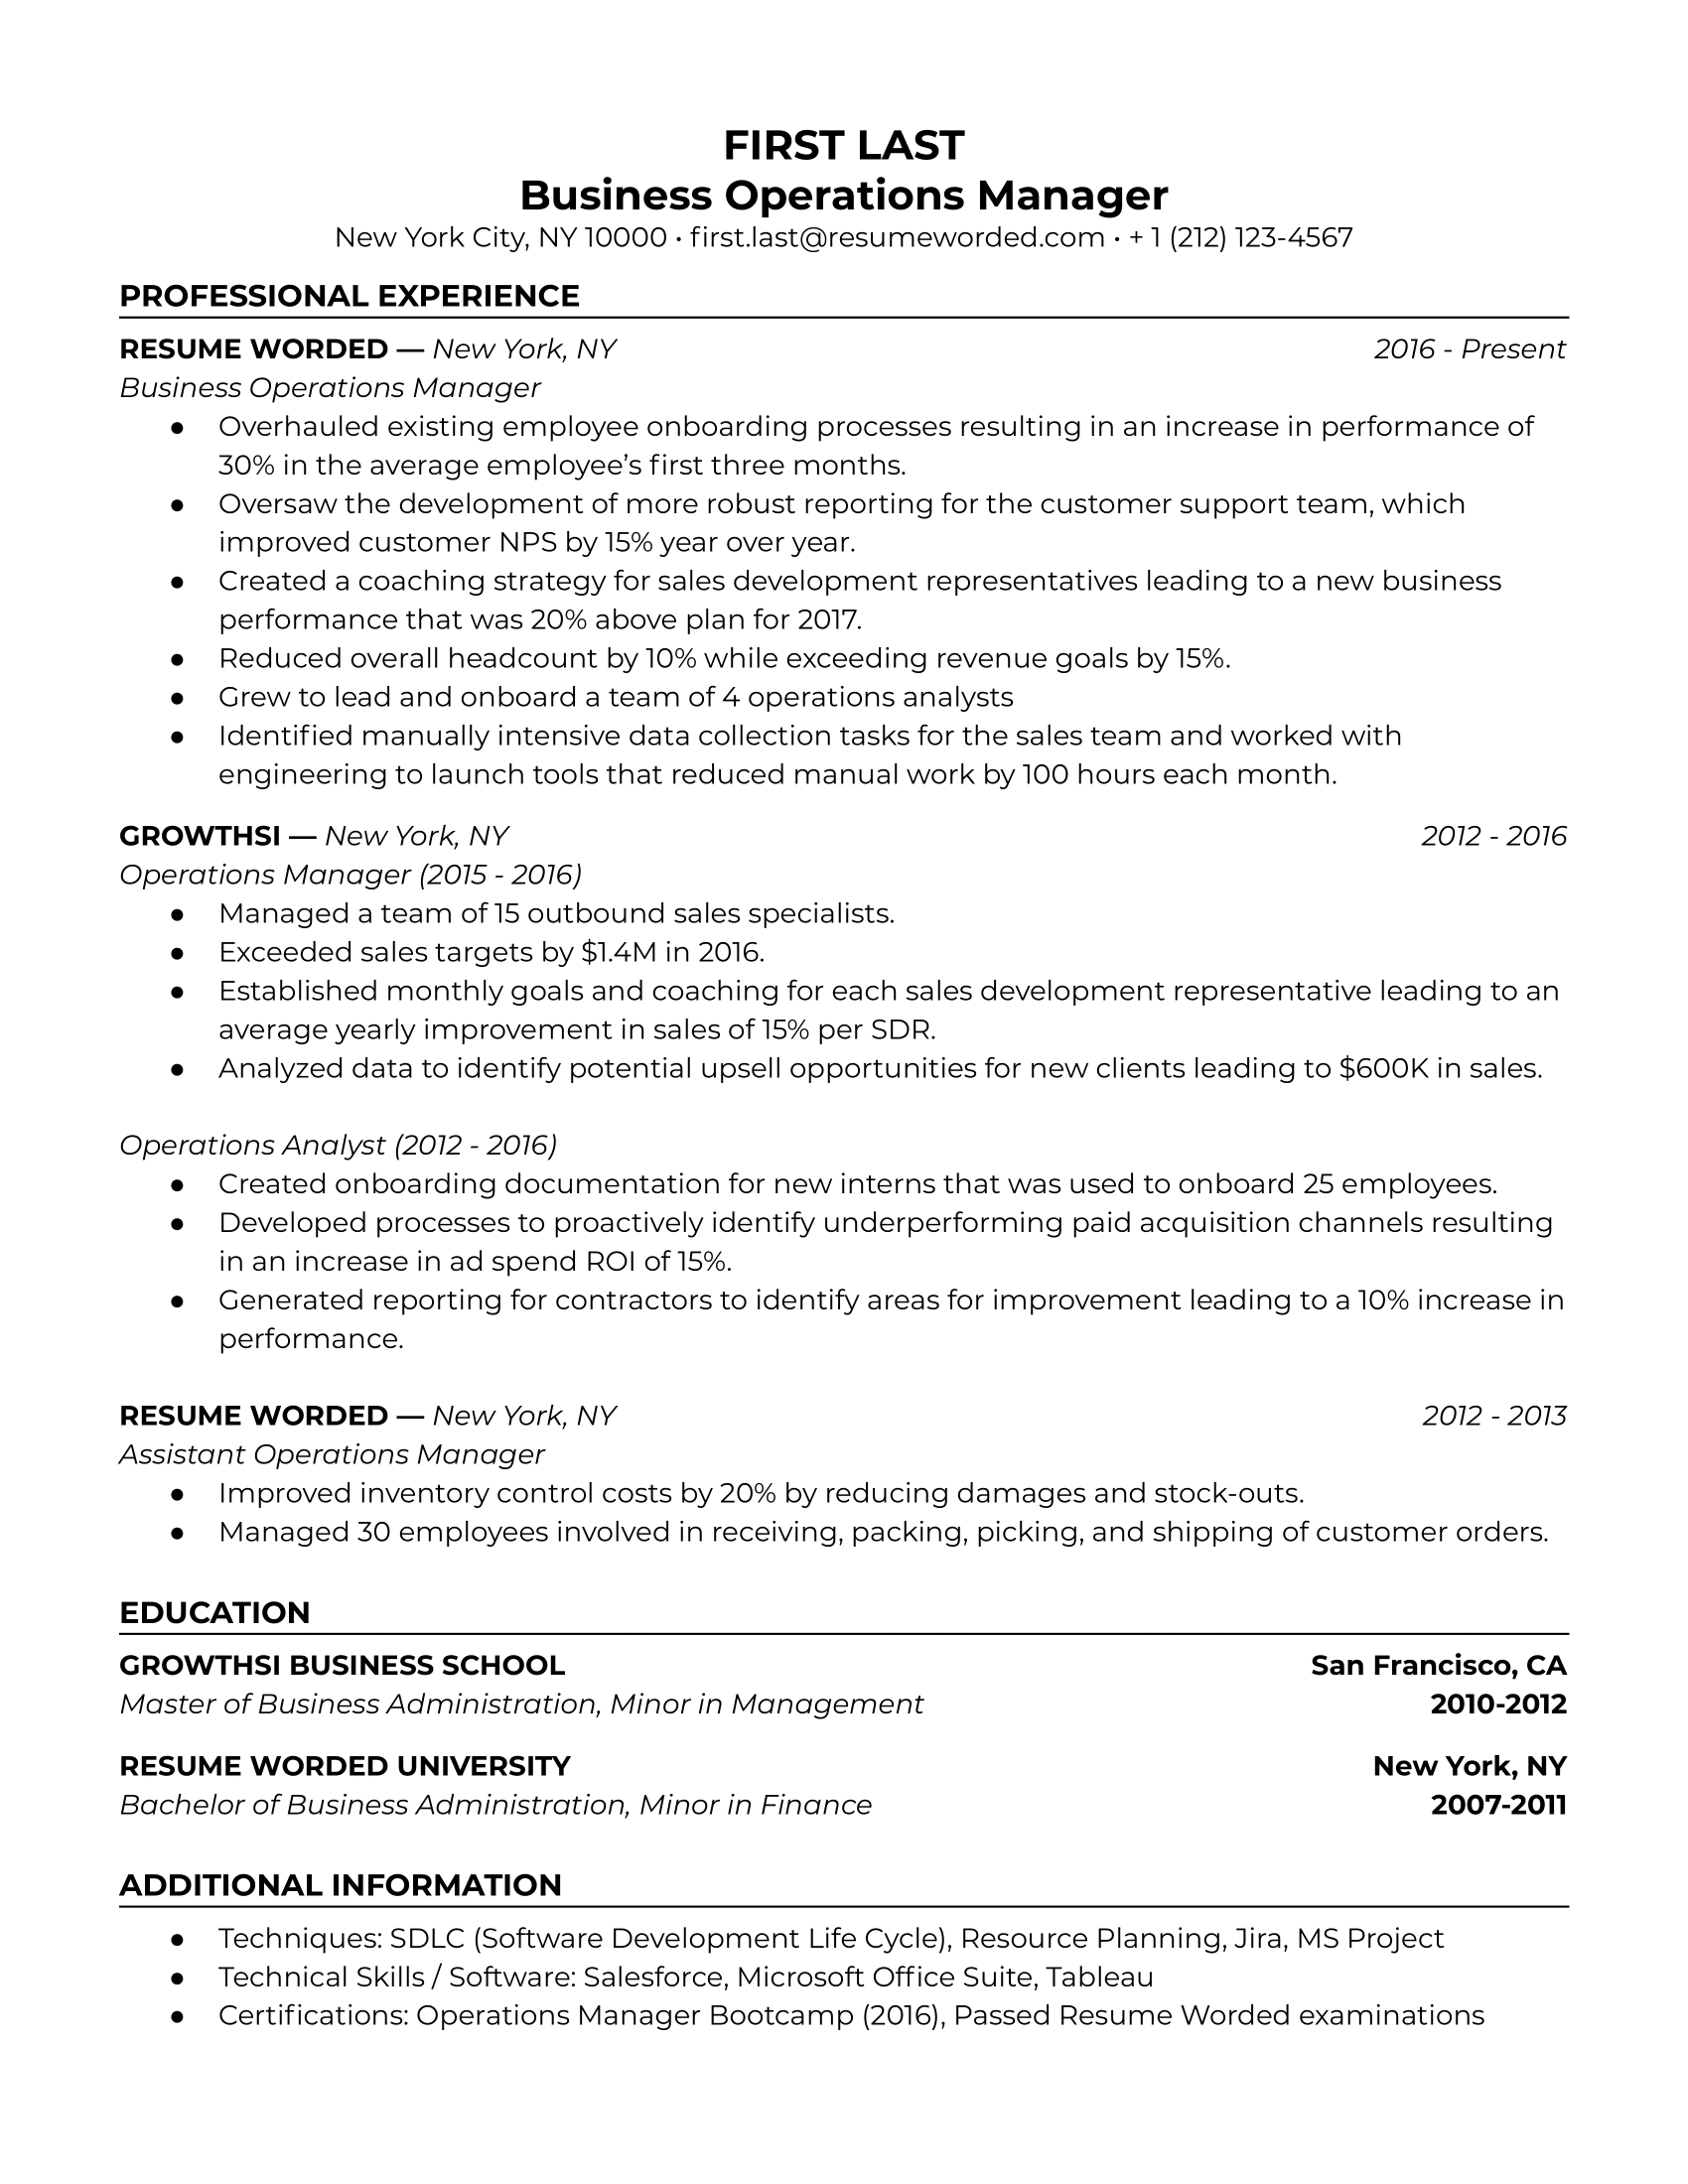 Business Operations Manager Resume Sample